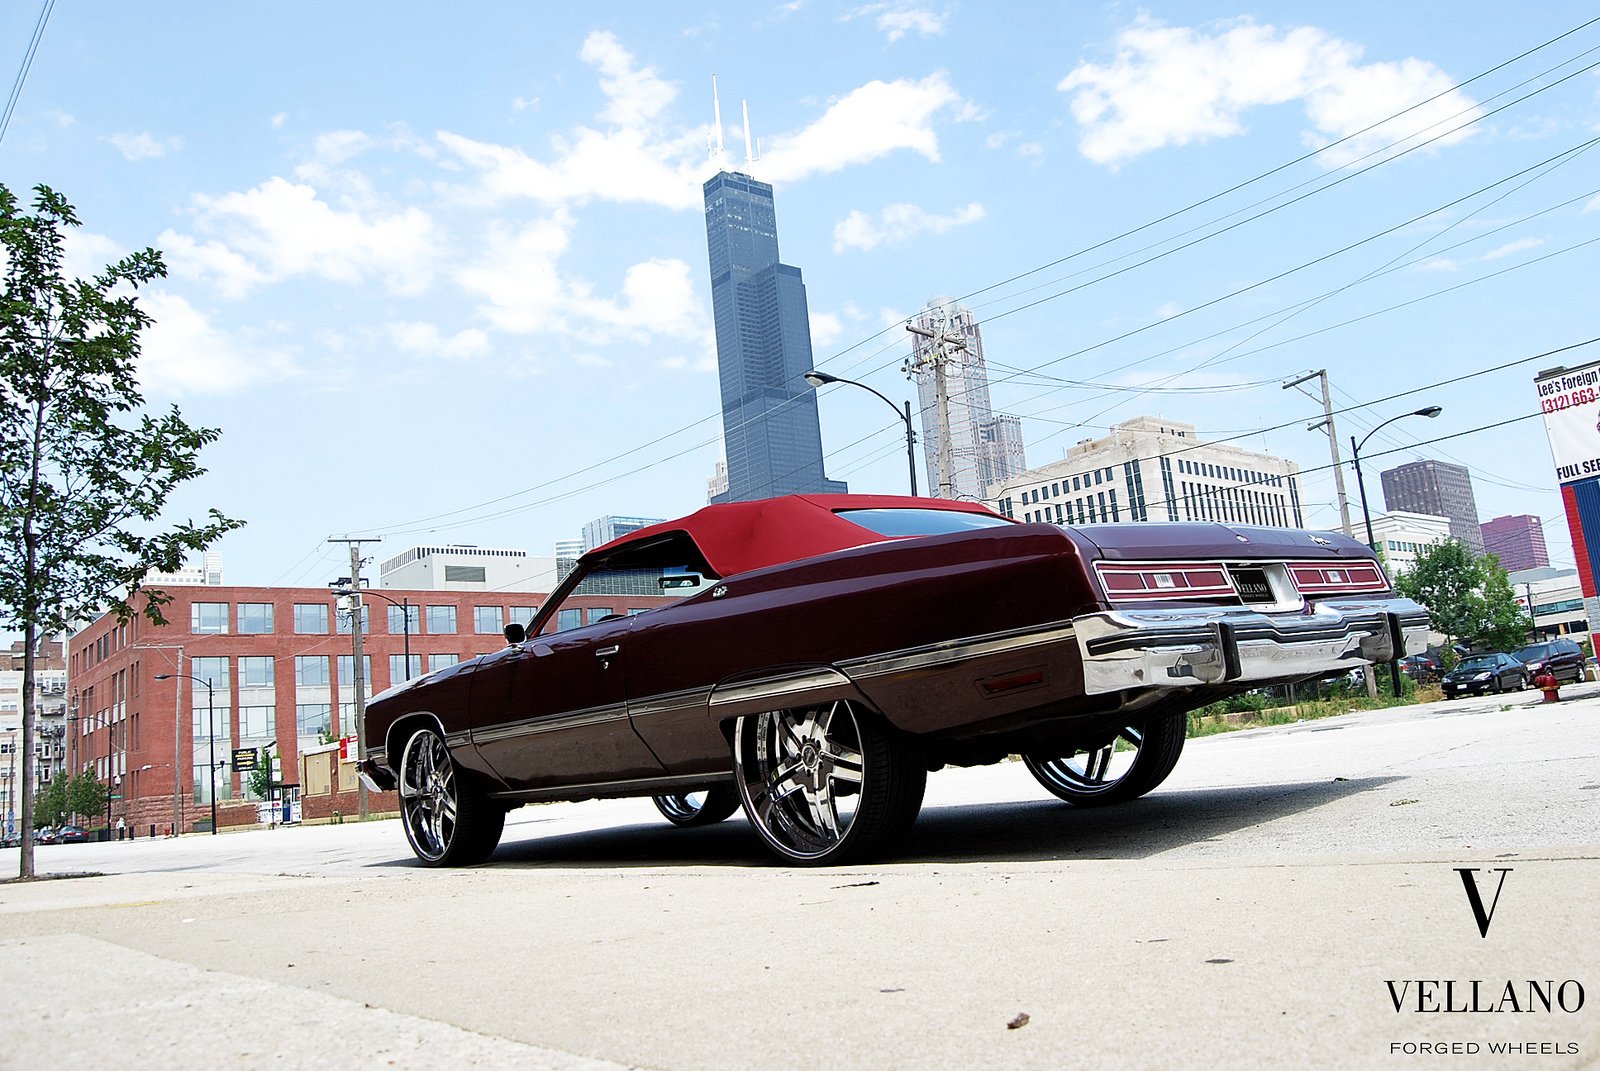 chevy, Caprice, Vintage, Vellano, Wheels, Tuning, Cars Wallpaper